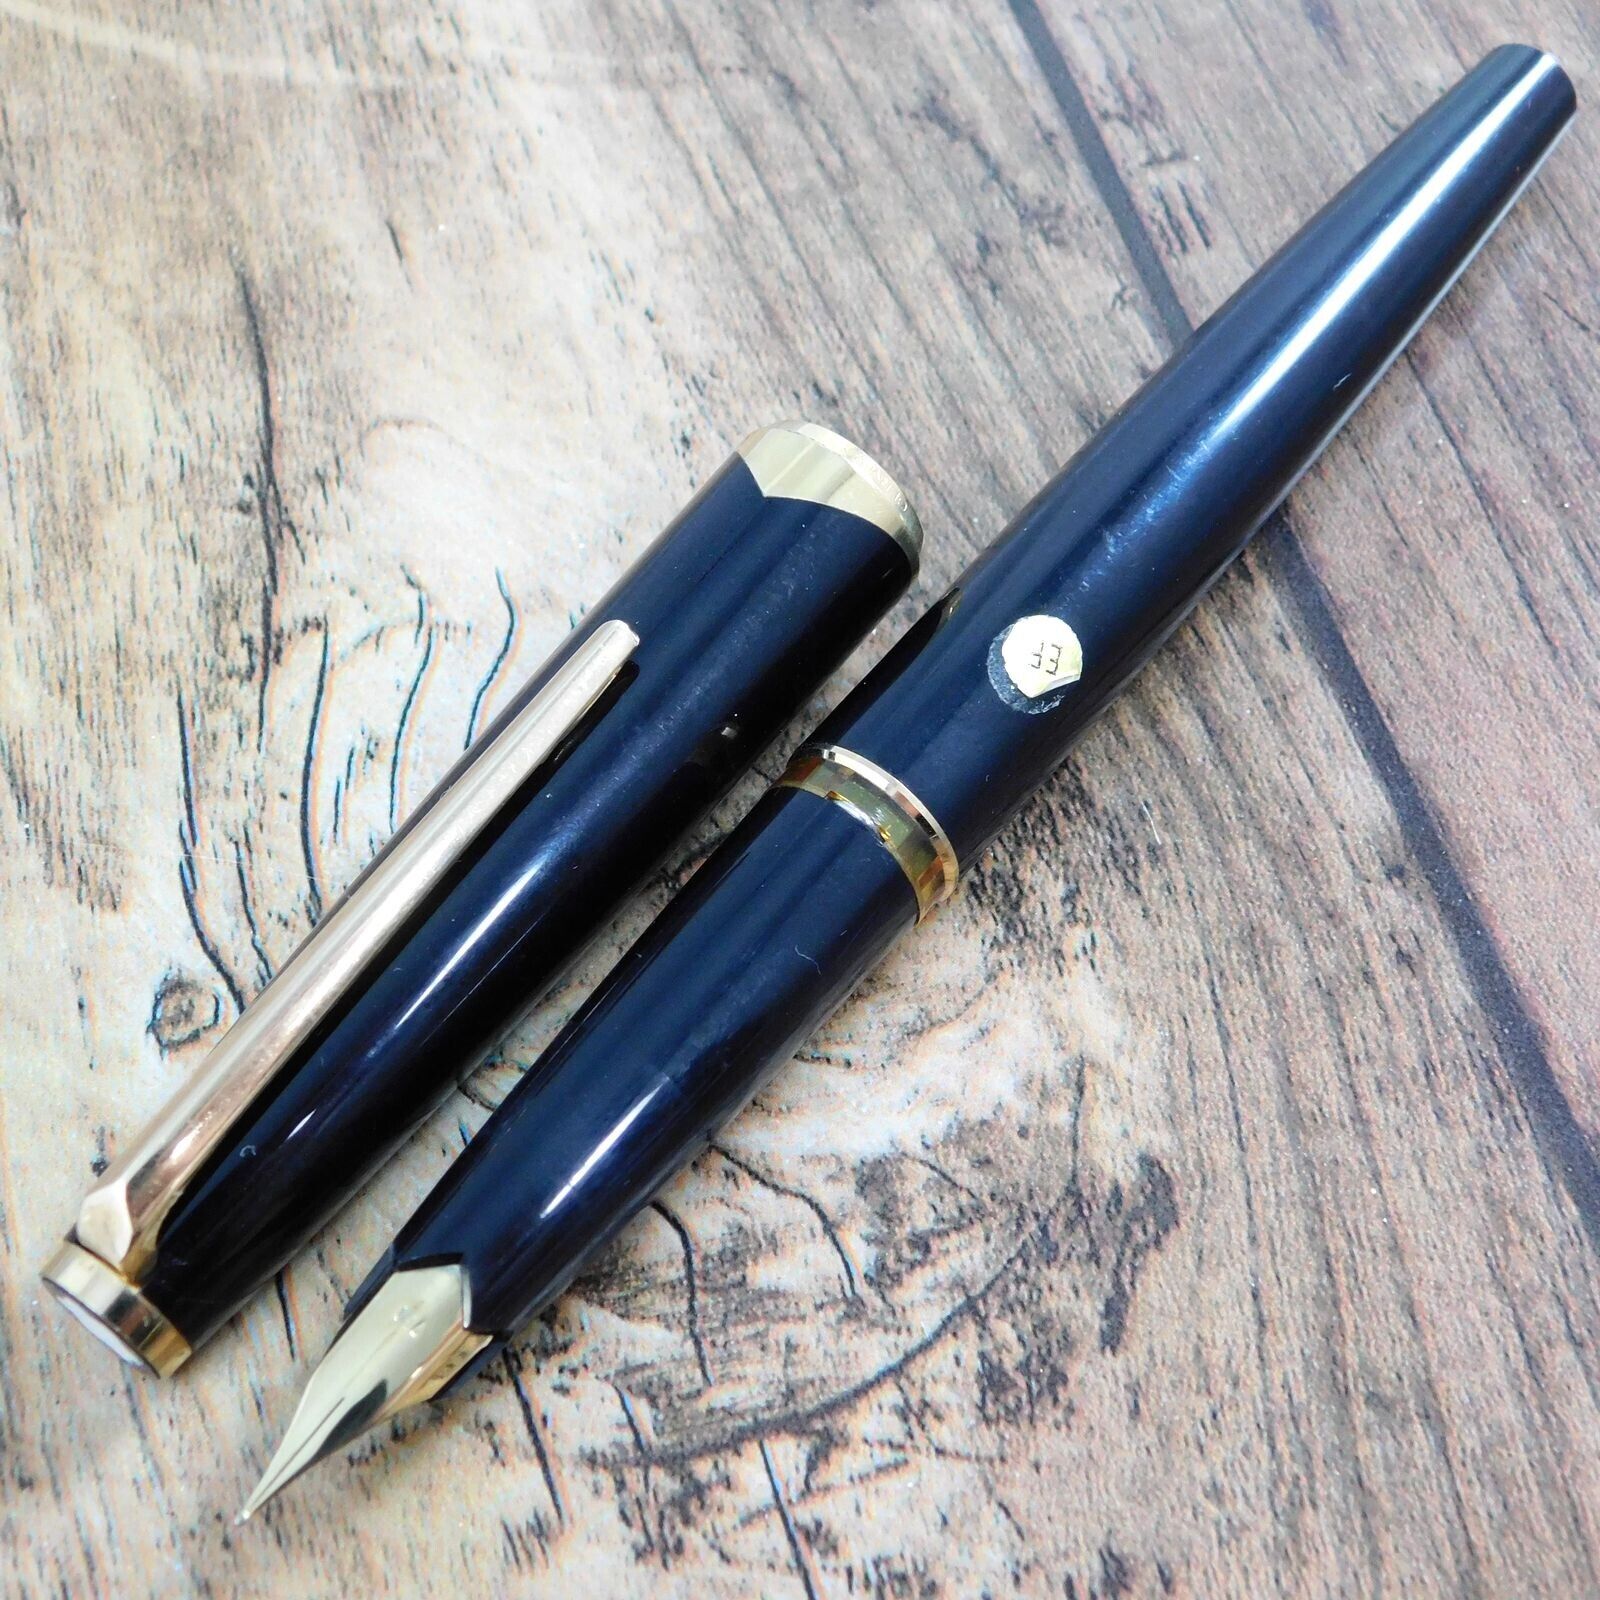 MONTBLANC 18K-750 FOUNTAIN PEN VINTAGE BLACK GOLD GERMANY MADE